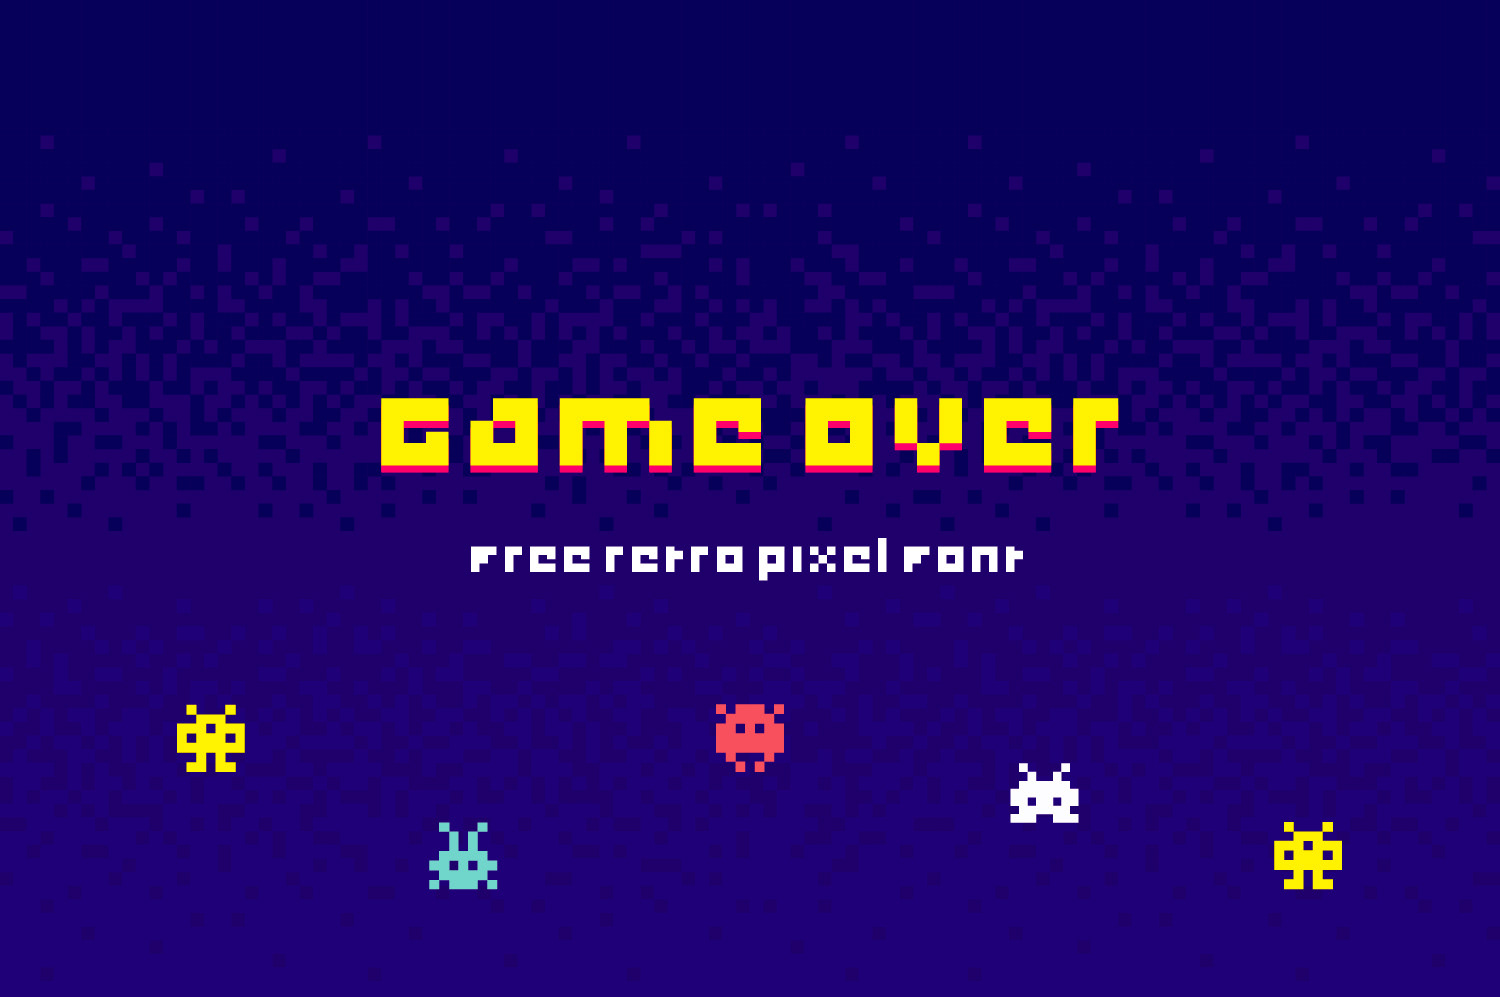 Game Over free font - bitmap-fonts